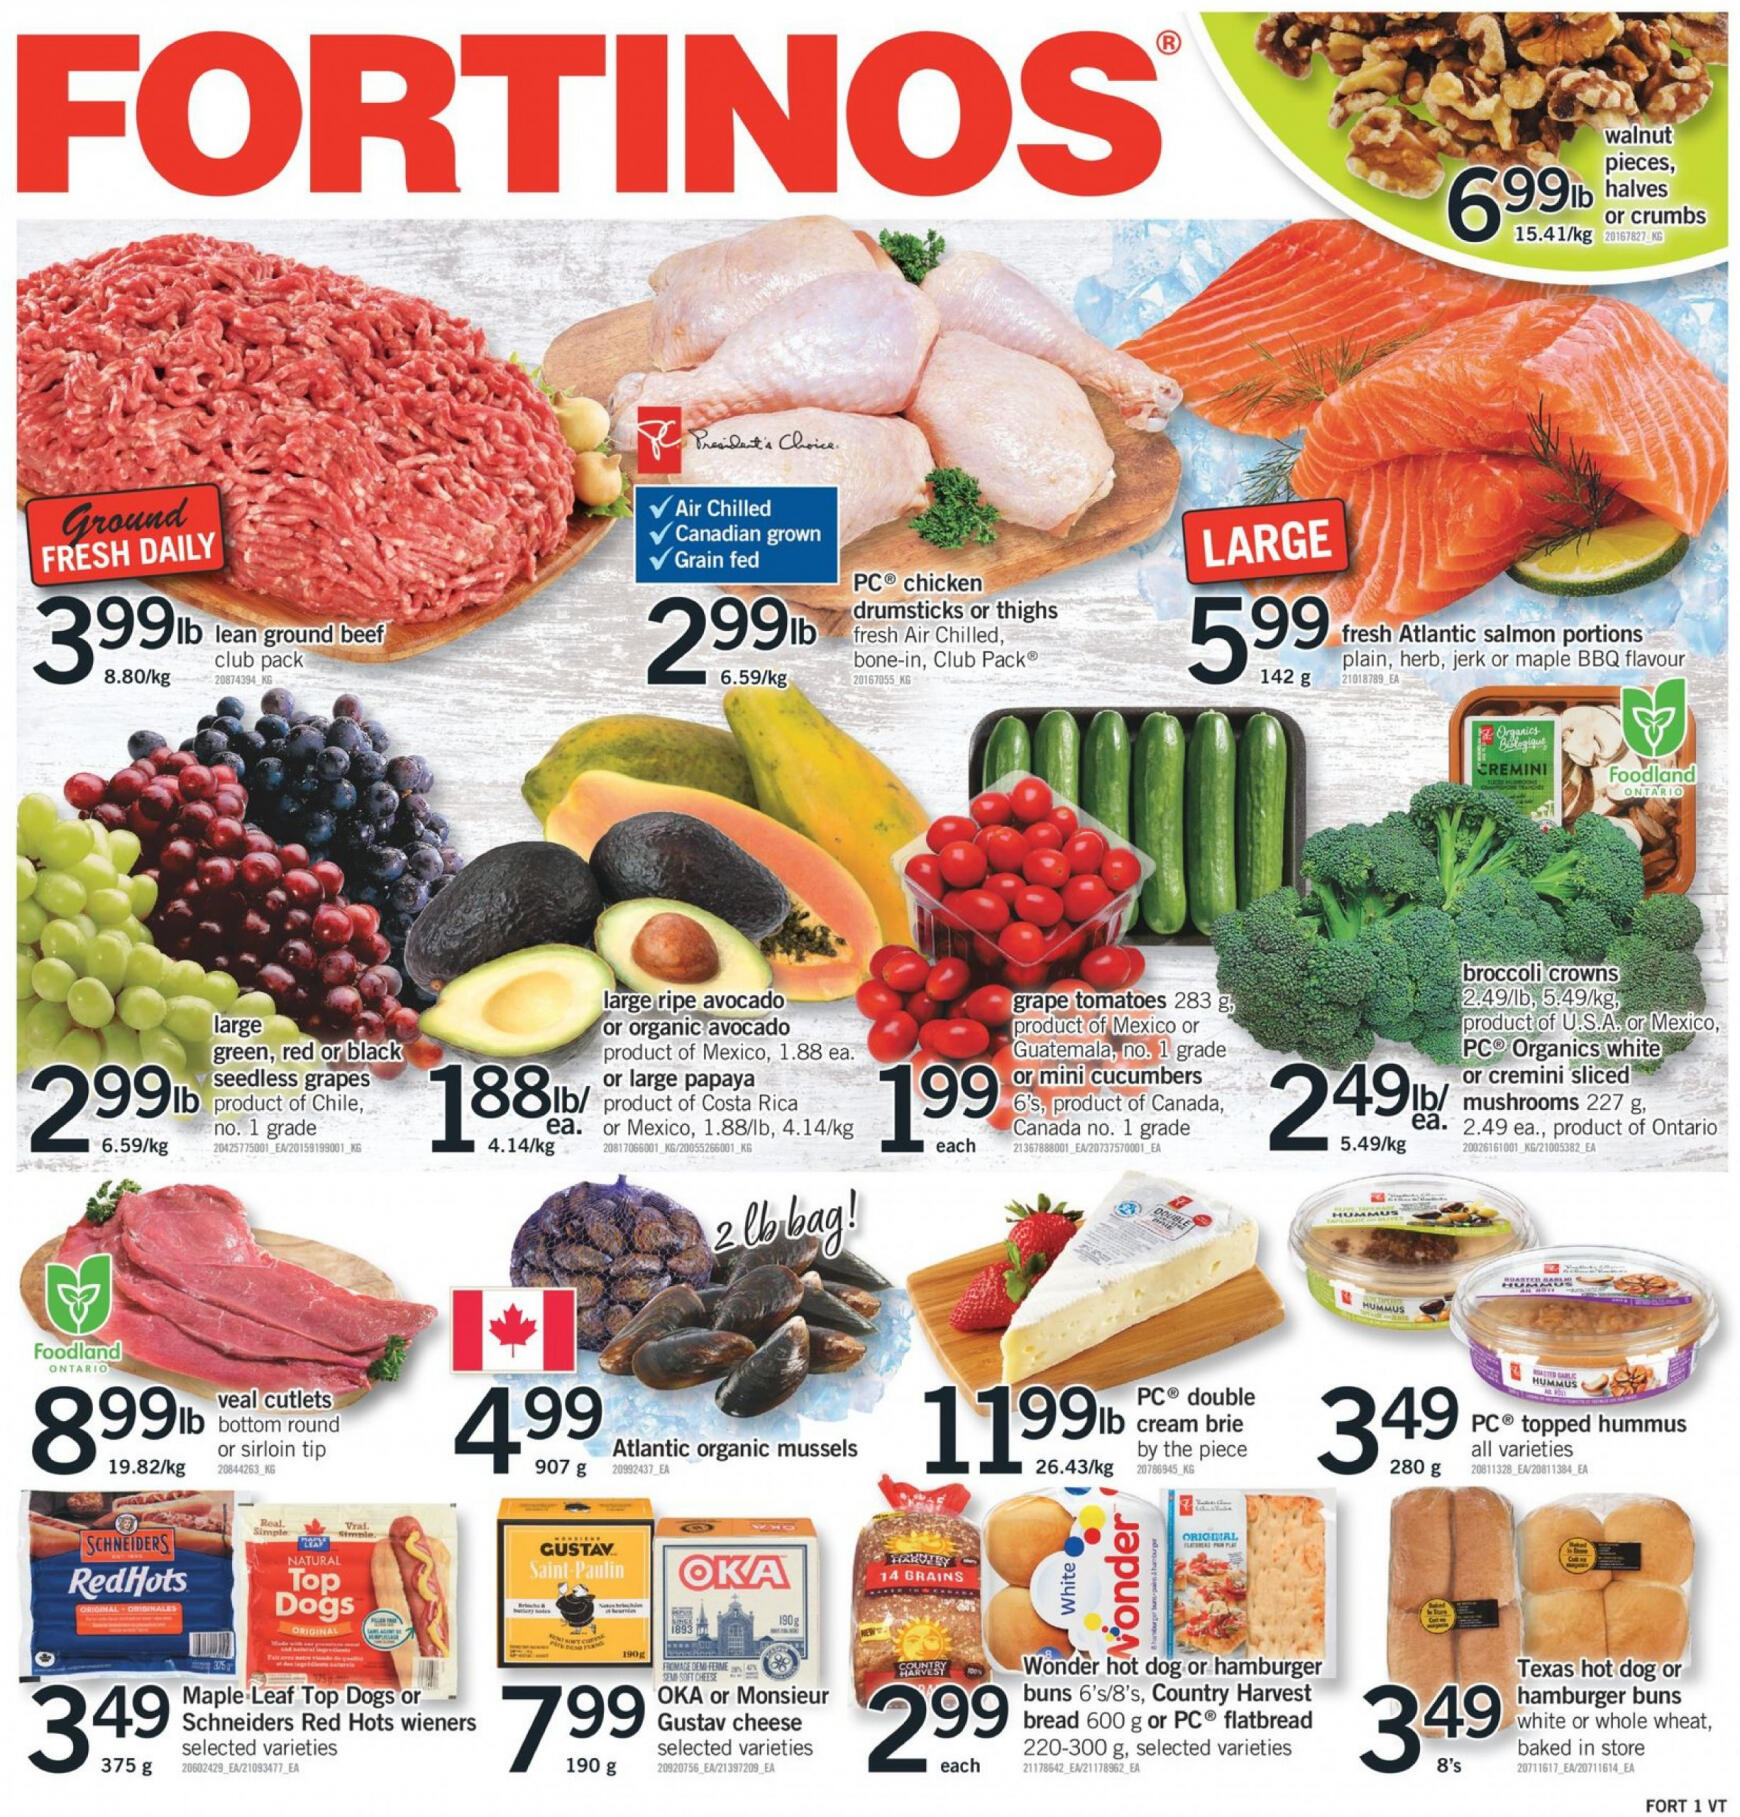 fortinos - Fortinos flyer current 02.05. - 08.05. - page: 1